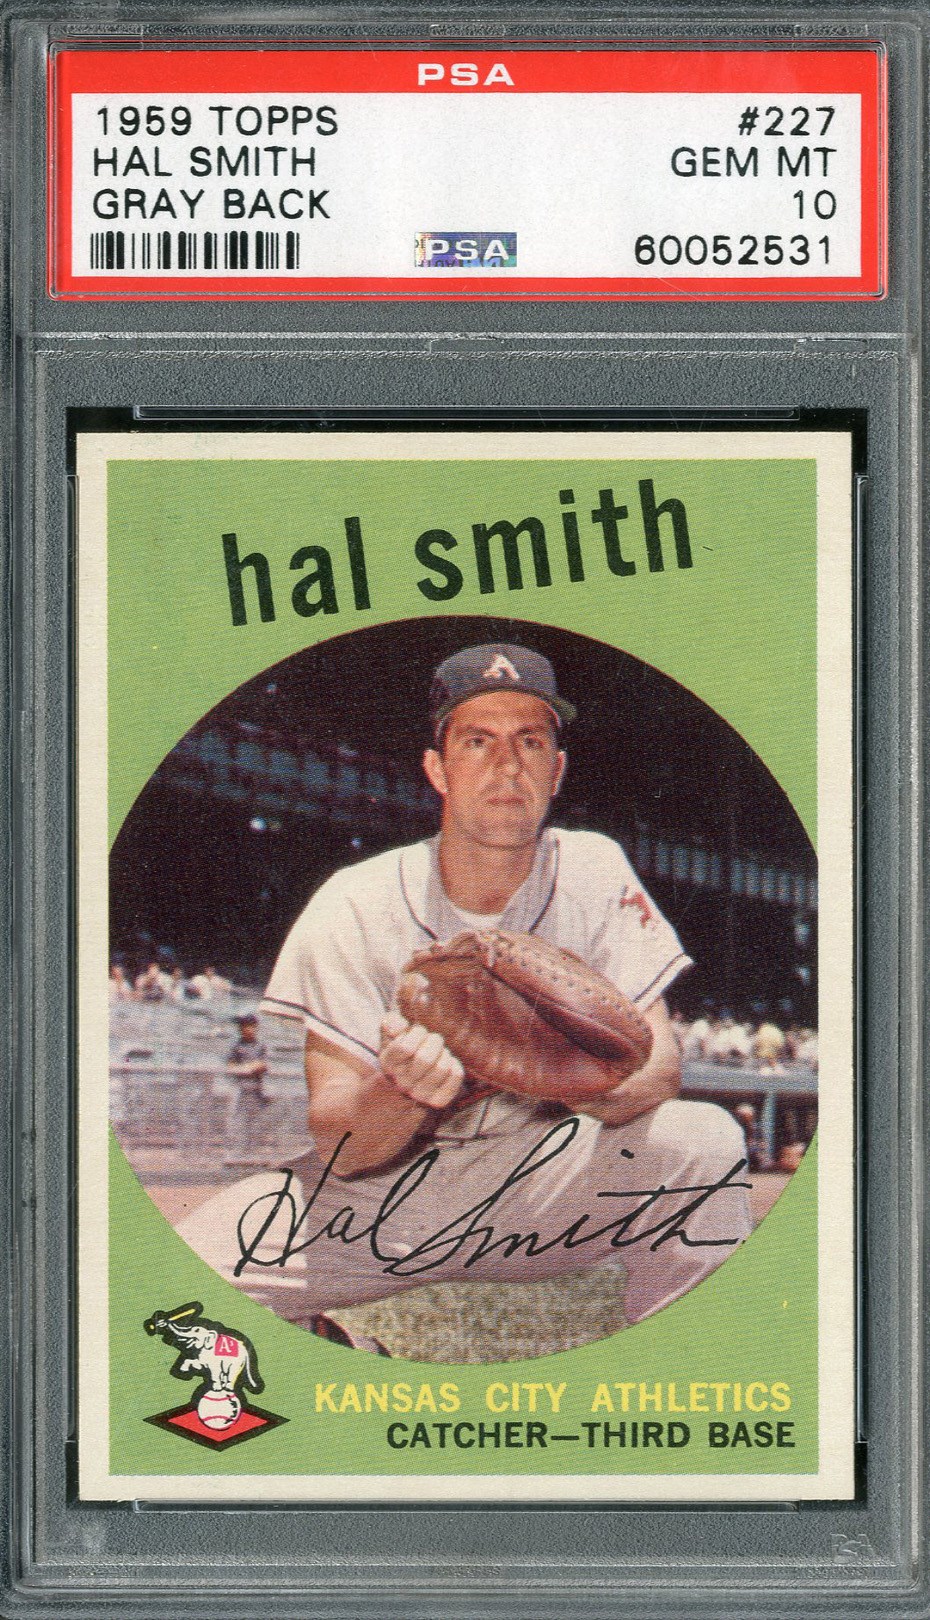 Baseball and Trading Cards - 1959 Topps #227 Hal Smith Gray Back PSA GEM MINT 10 (Pop 1)